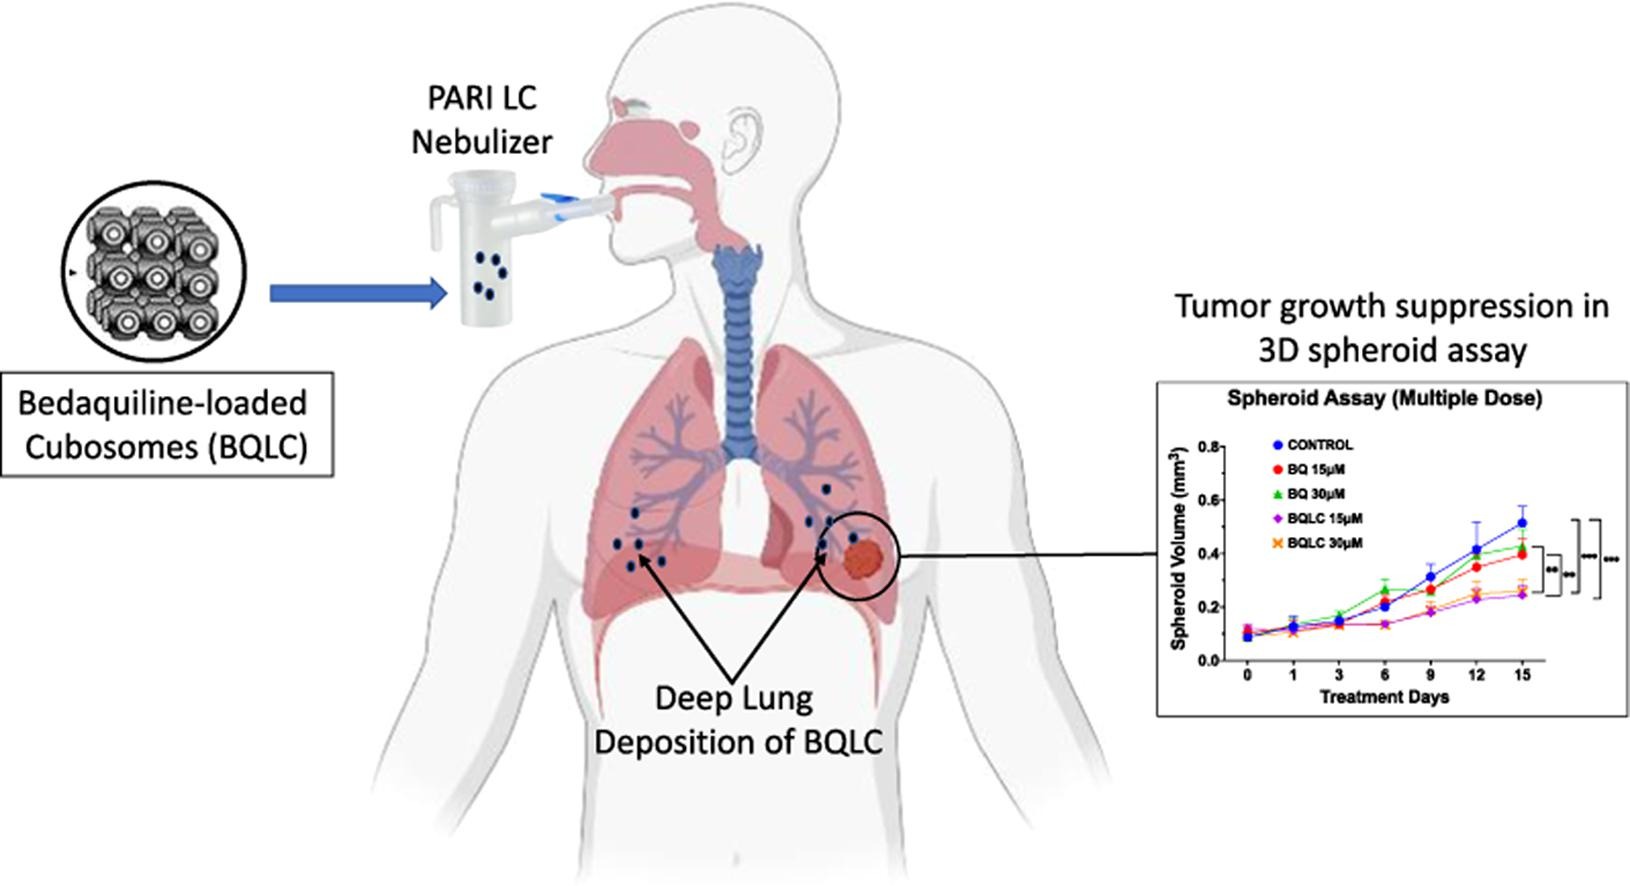 Inhalable bedaquiline-loaded cubosomes for the treatment of non-small cell lung cancer (NSCLC)